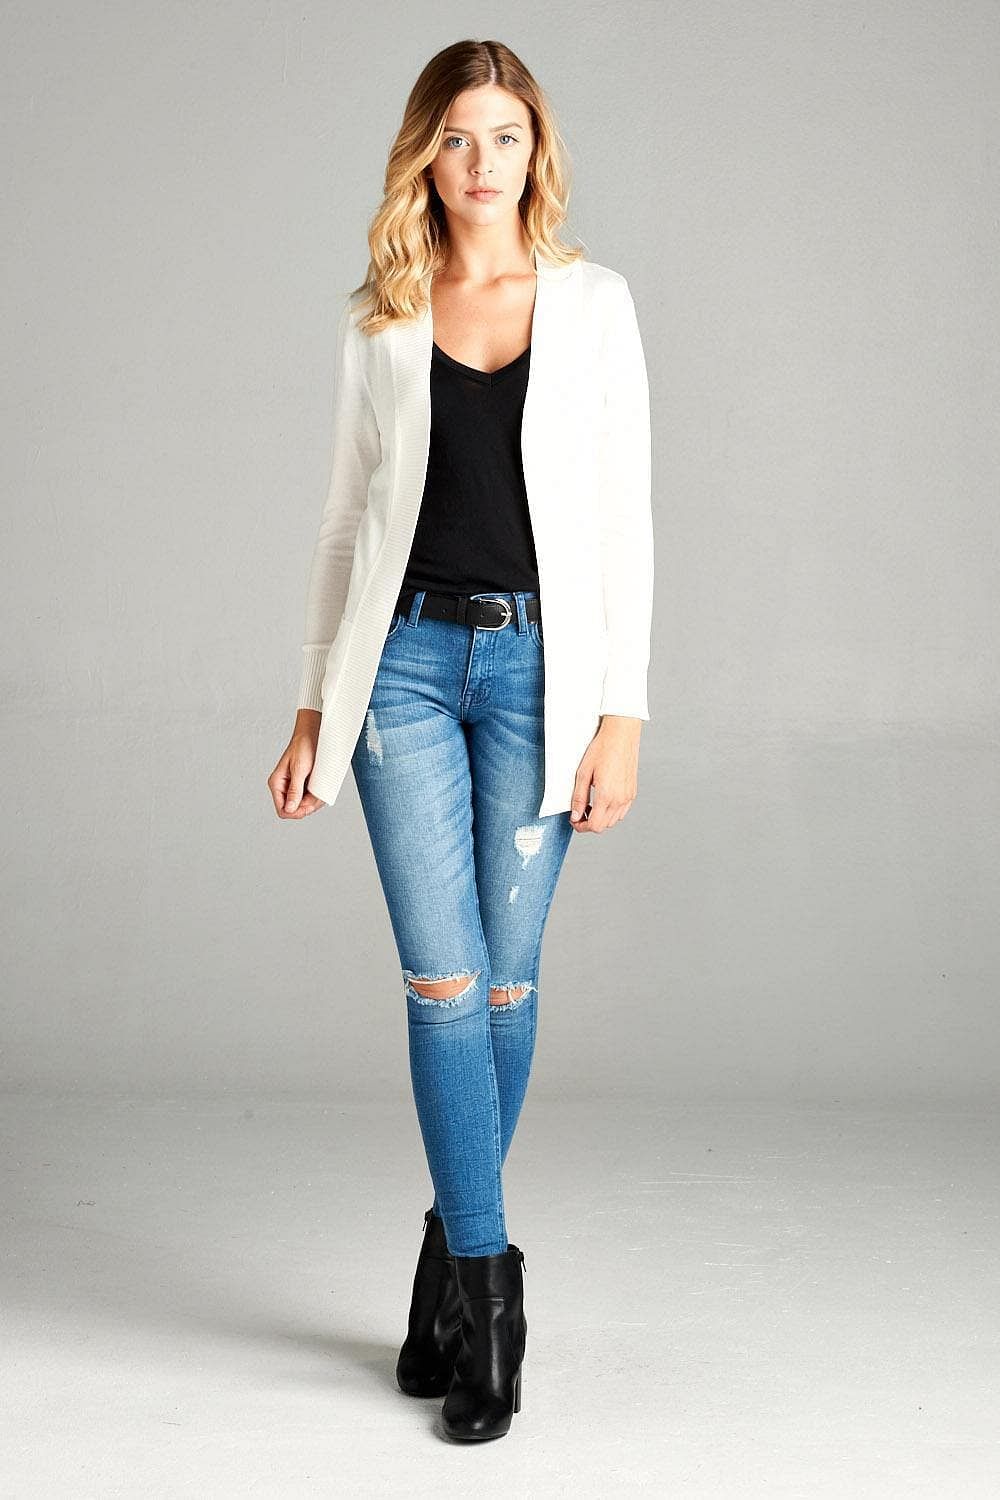 White Long Sleeve Open Front Rib knit Cardigan - Shopping Therapy M Cardigan